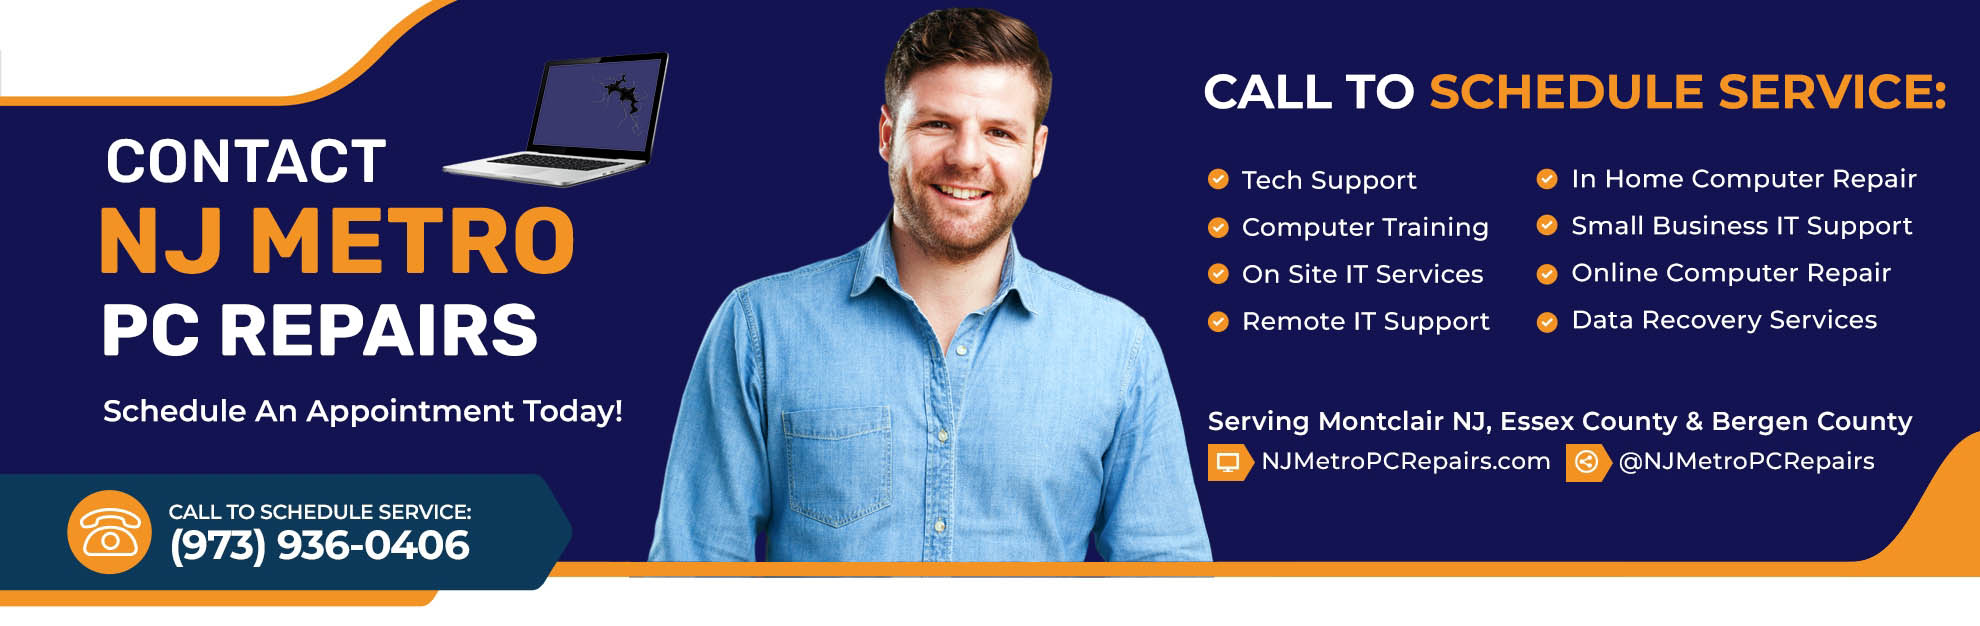 Banner Image with Confident Smiling Computer Repair Technician and NJ Metro PC Repairs' Contact Information